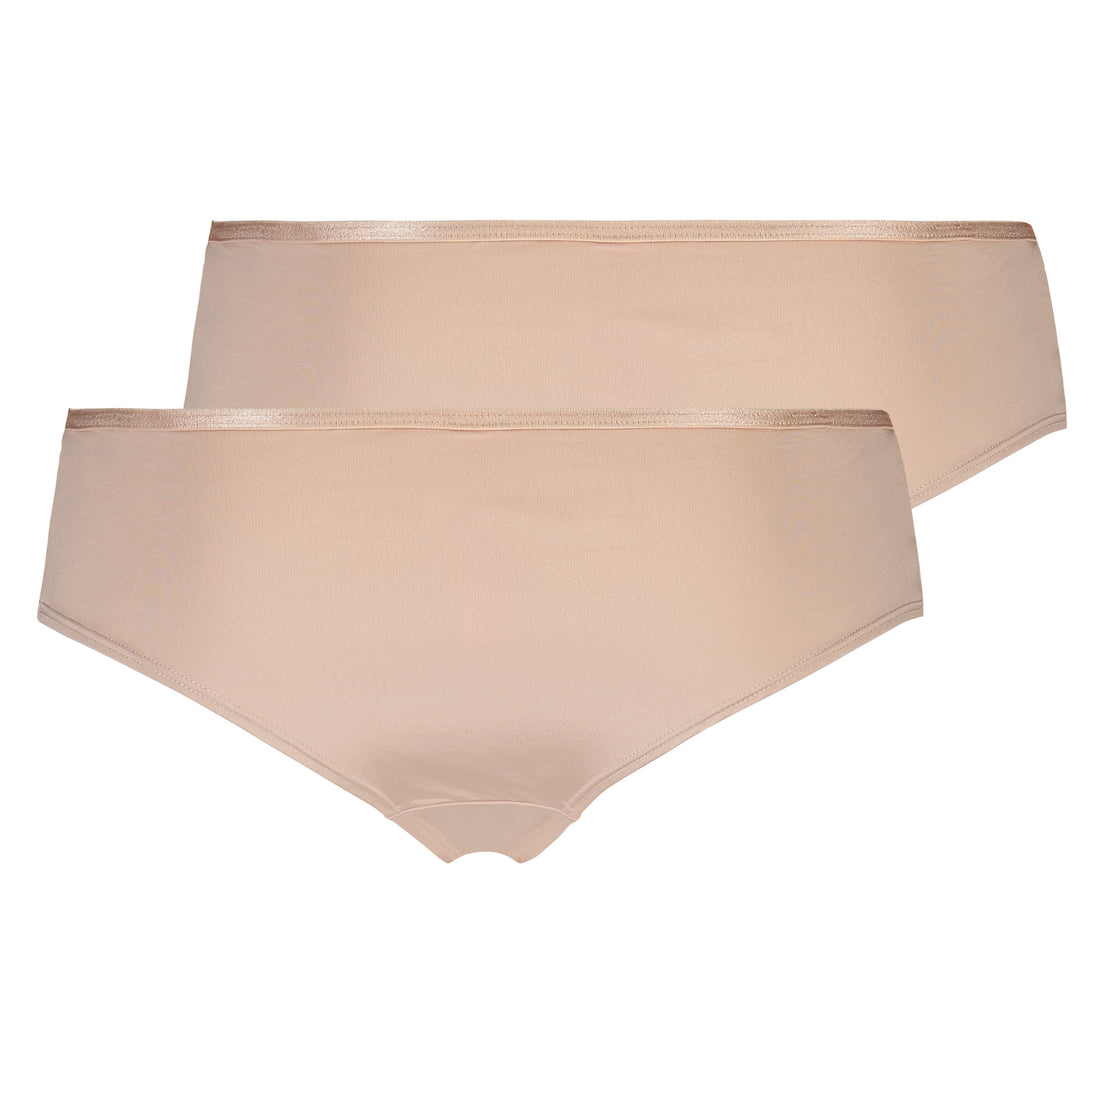 2 Pack Angie Brasilian Briefs_136476_Rugby Tan_02